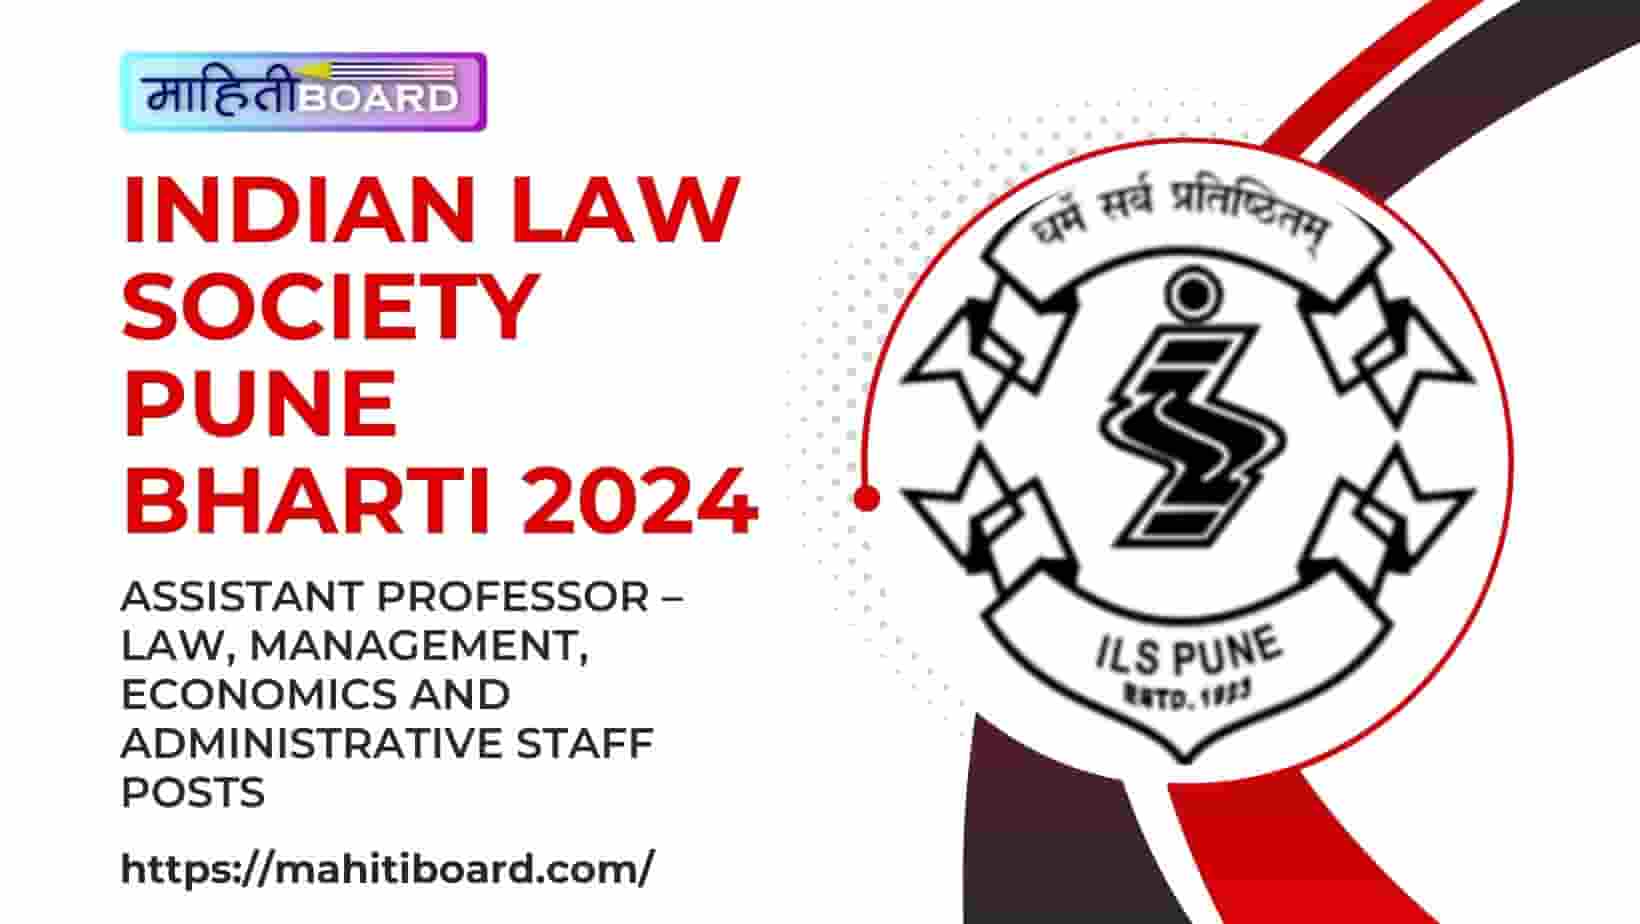 Indian Law Society Pune Bharti 2024